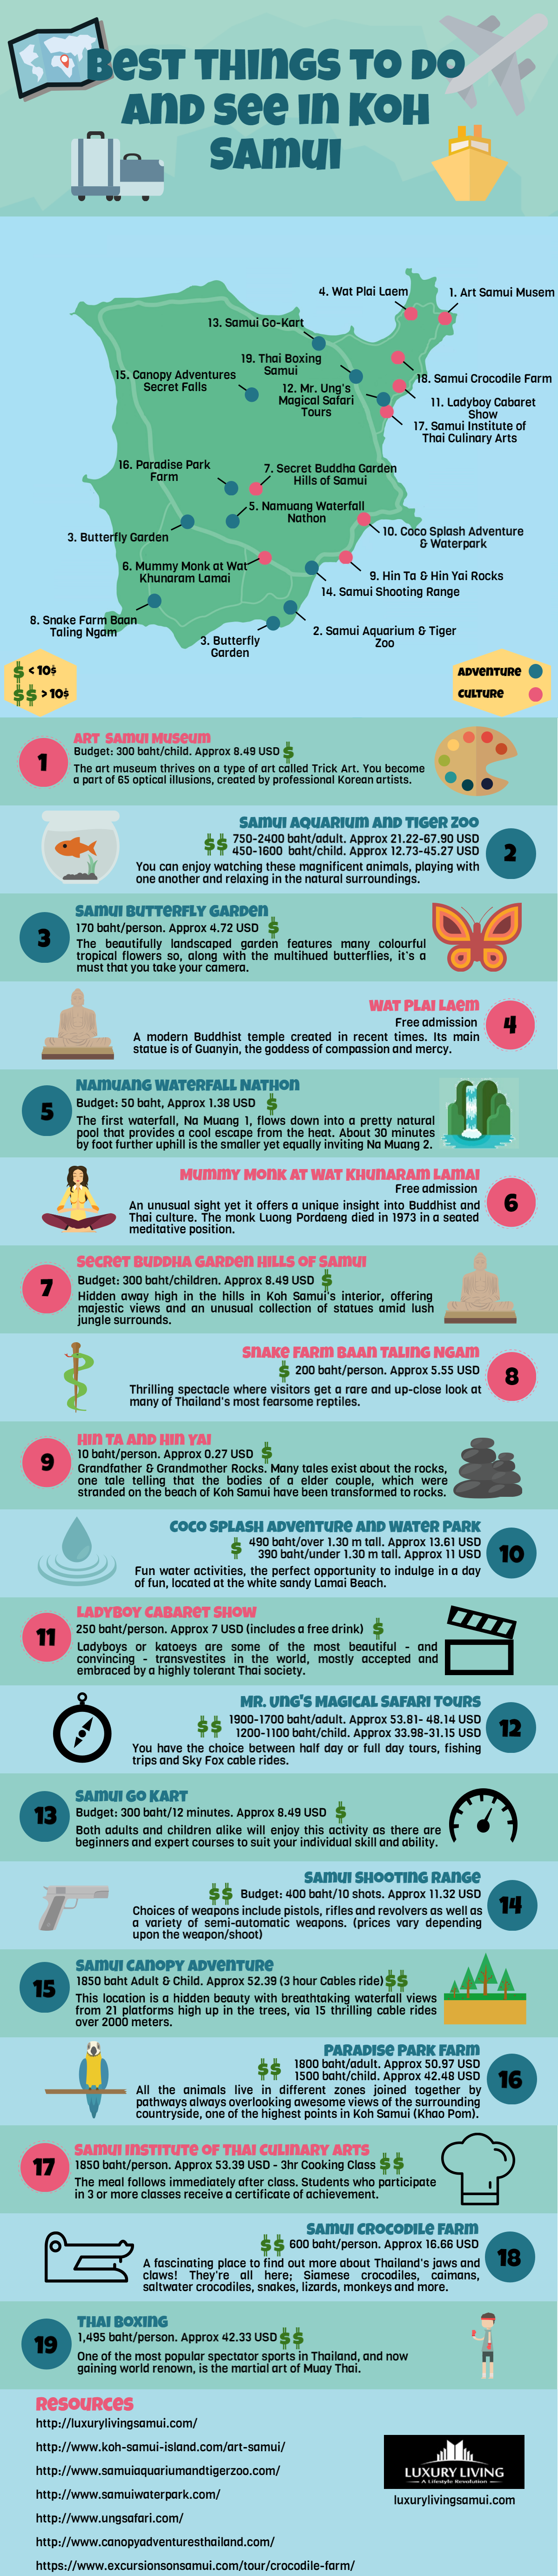 Koh Samui - 19 Things To Do and See #infographic